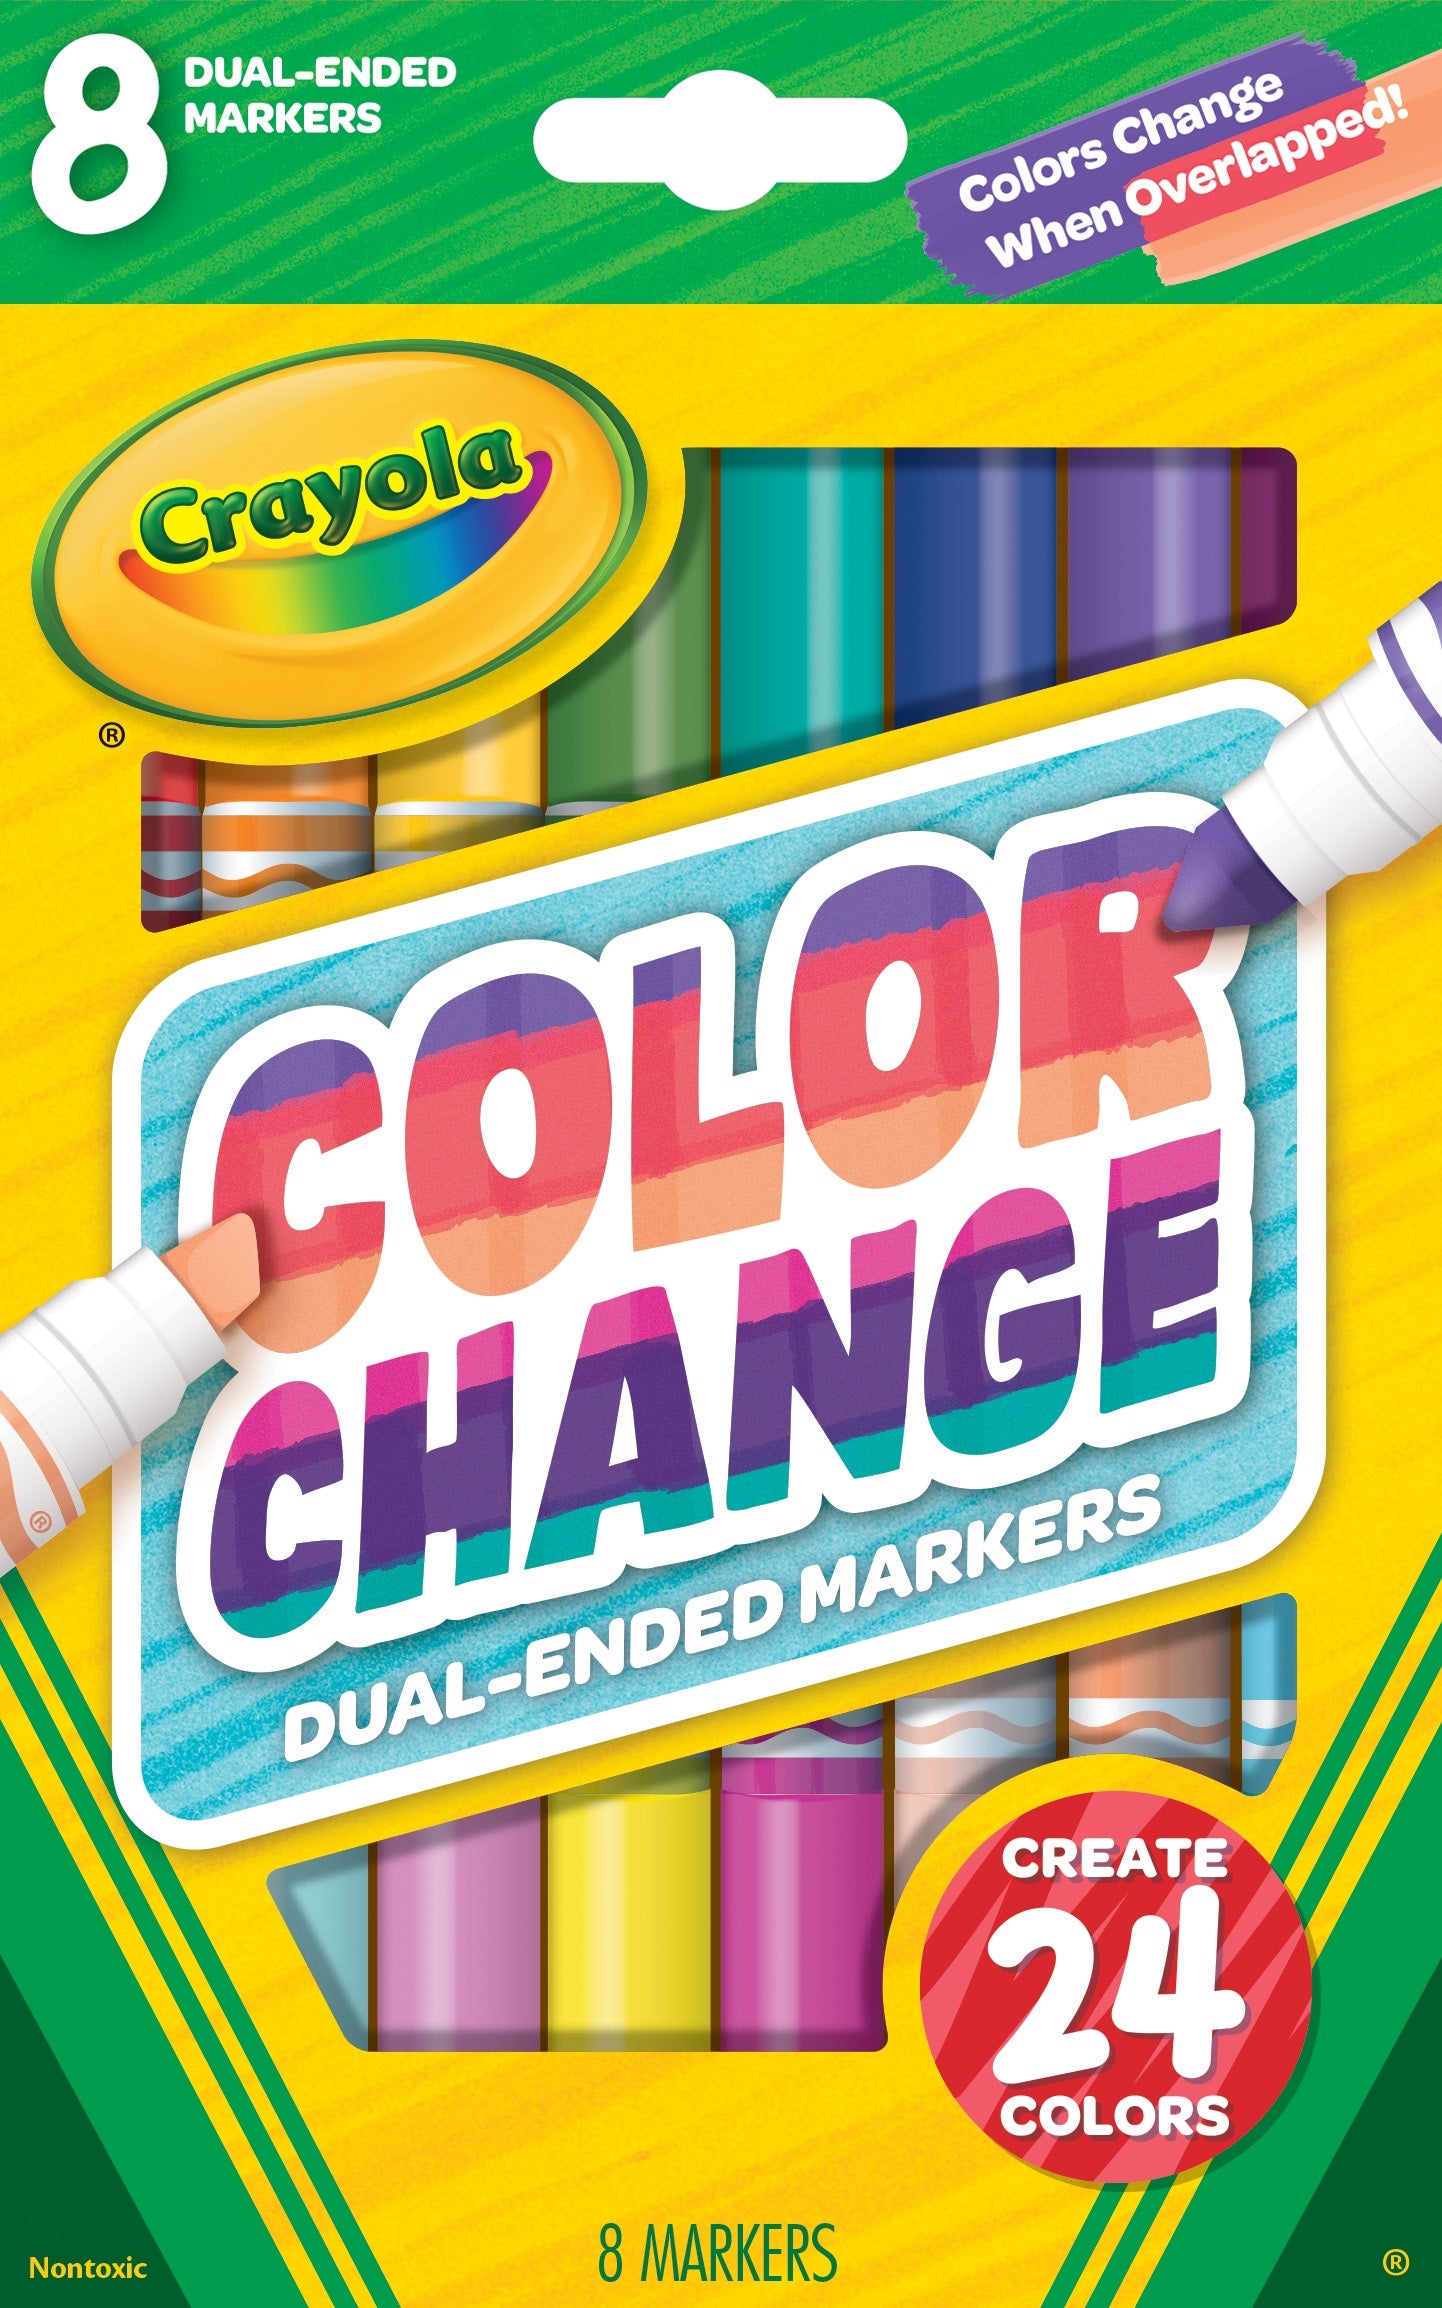 Crayola Color Change Dual Ended Markers 8 markers